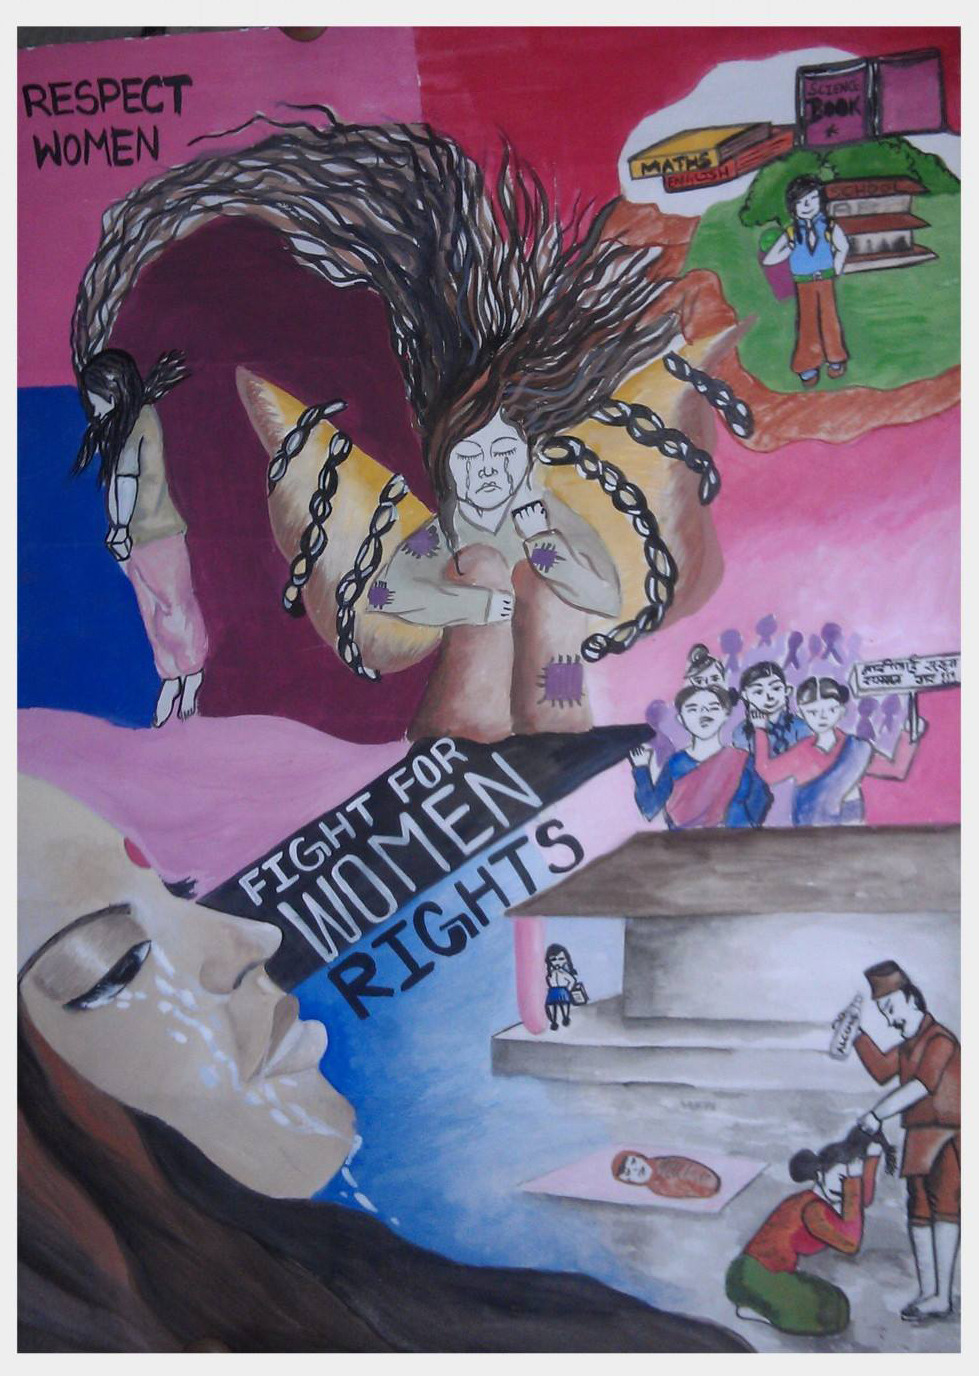 AI Nepal youth activists organized a painting competition and 50 youth activists from 3 youth networks participated. Here is a snapshot of one of the many participants&#8217; canvas on women&#8217;s role in creating change.